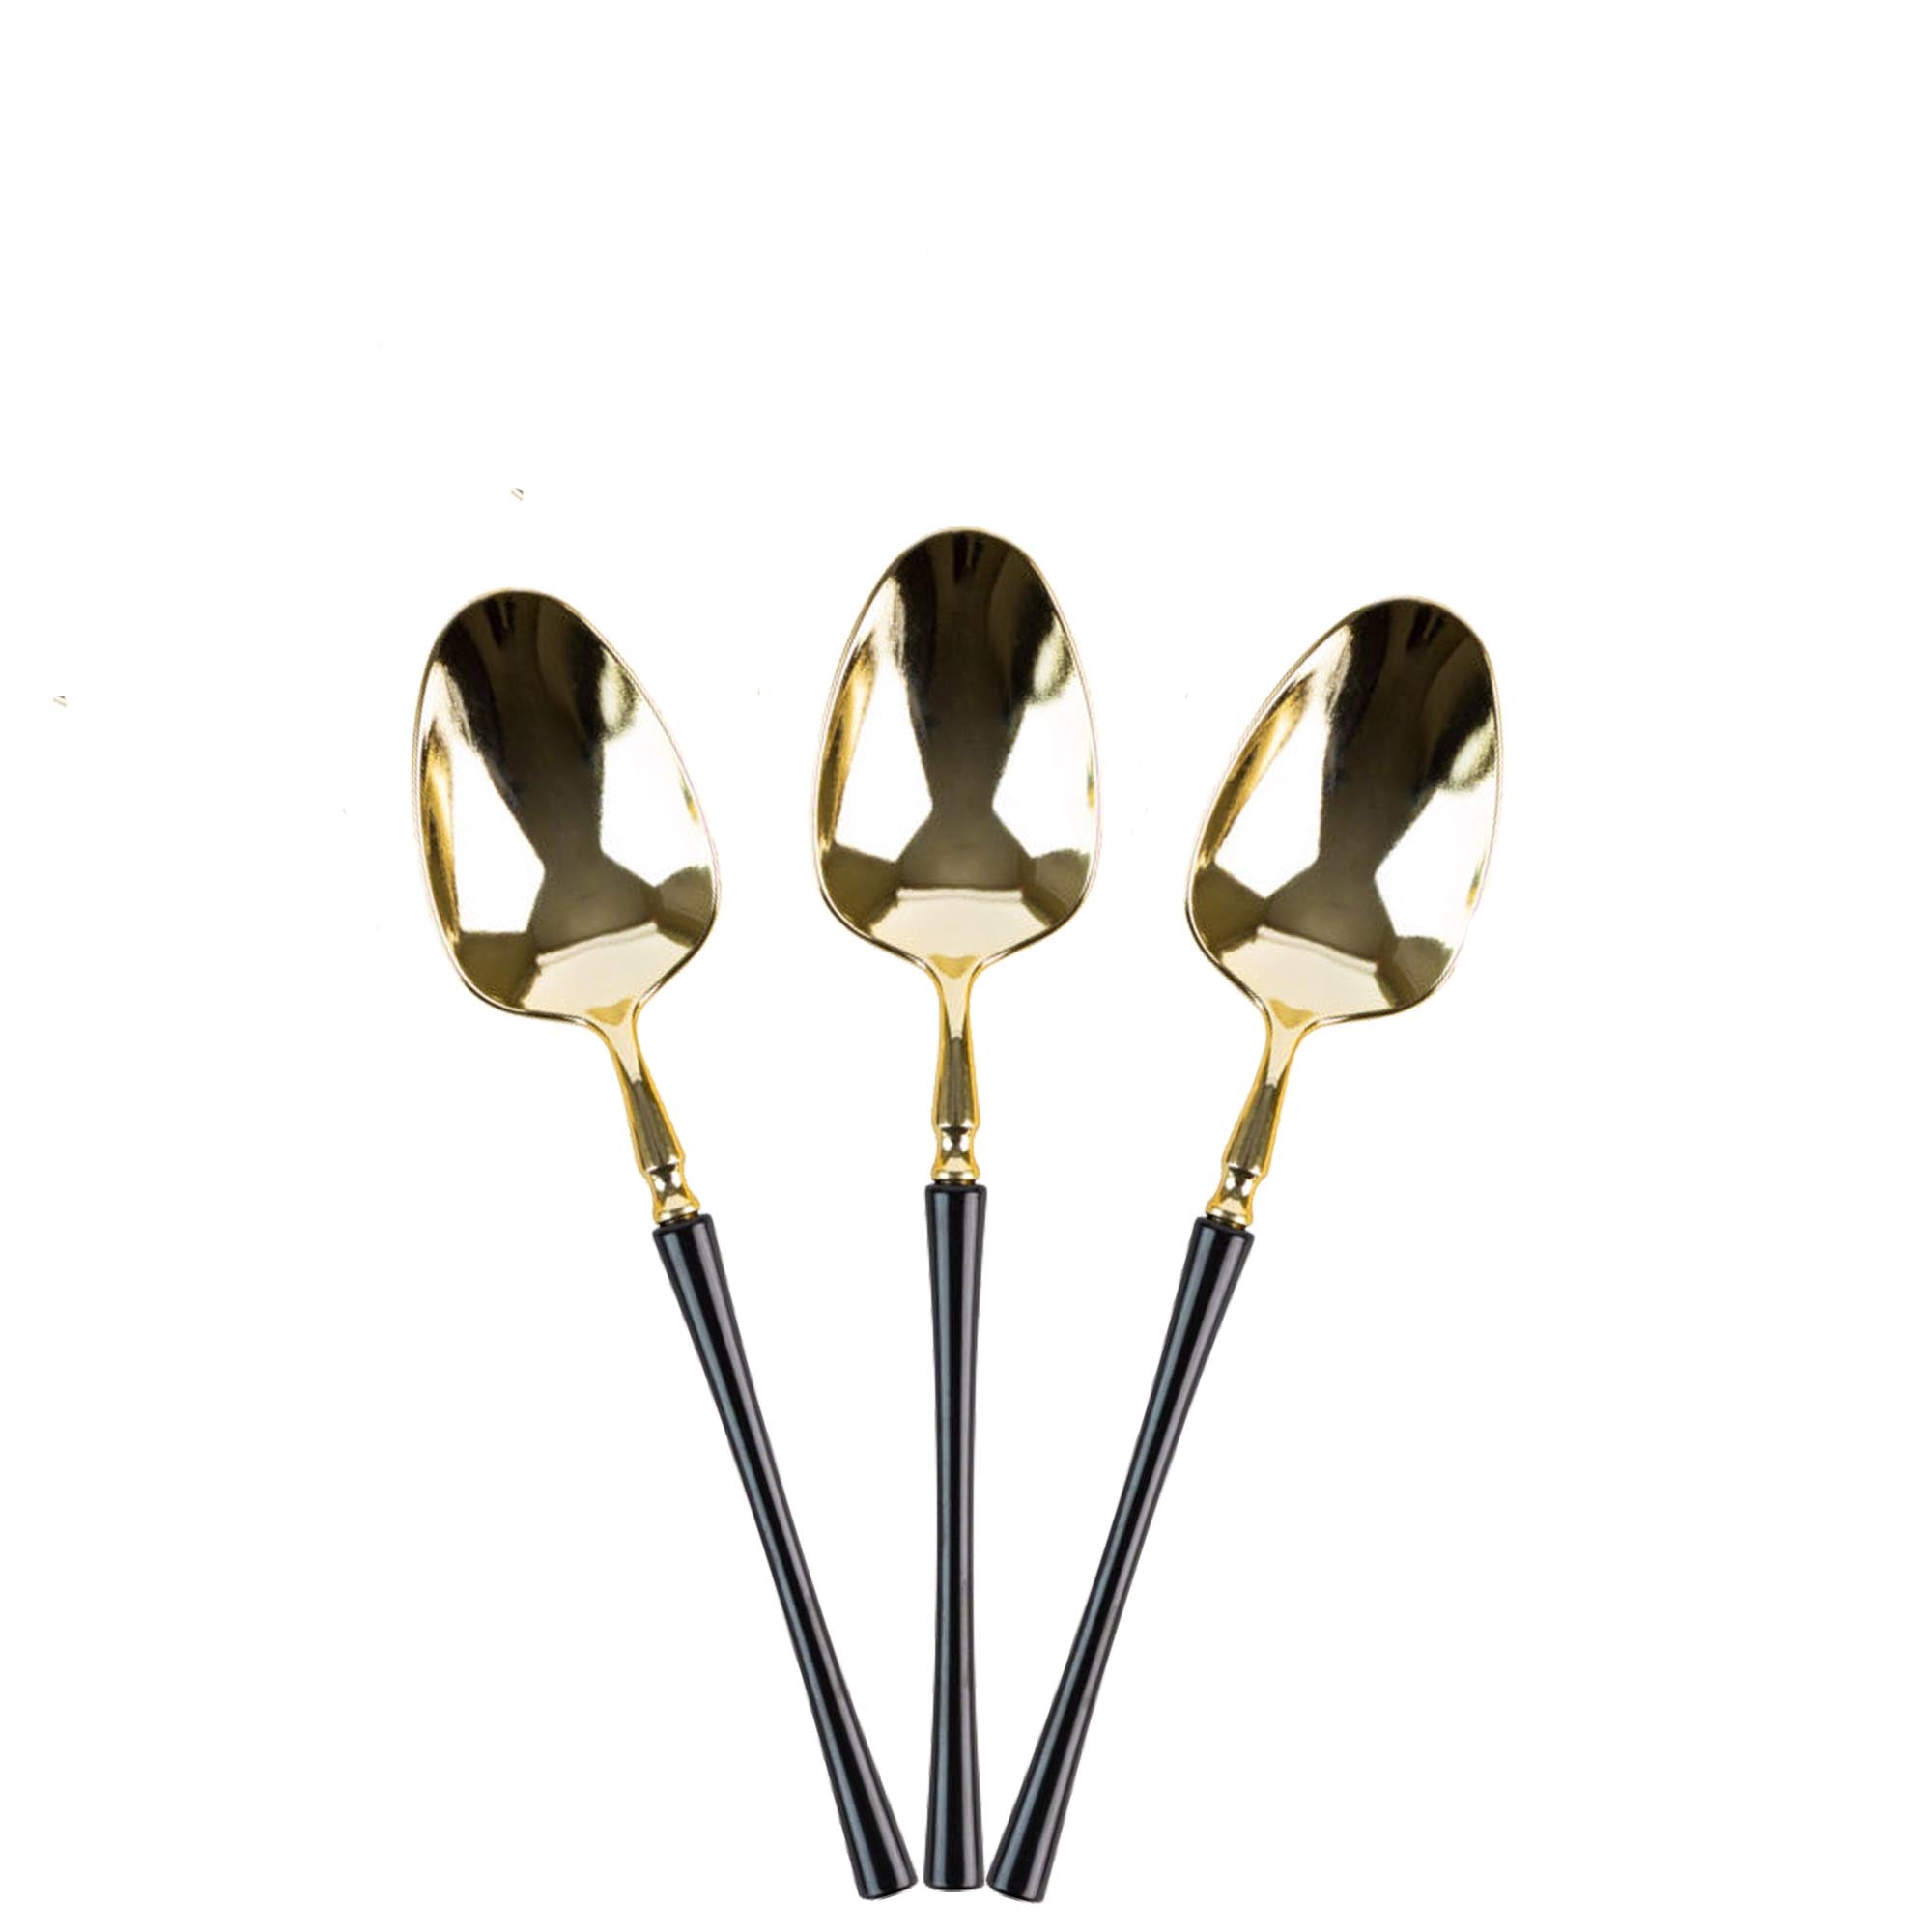 Plastic Tea Spoons Black and Gold Infinity Flatware Collection